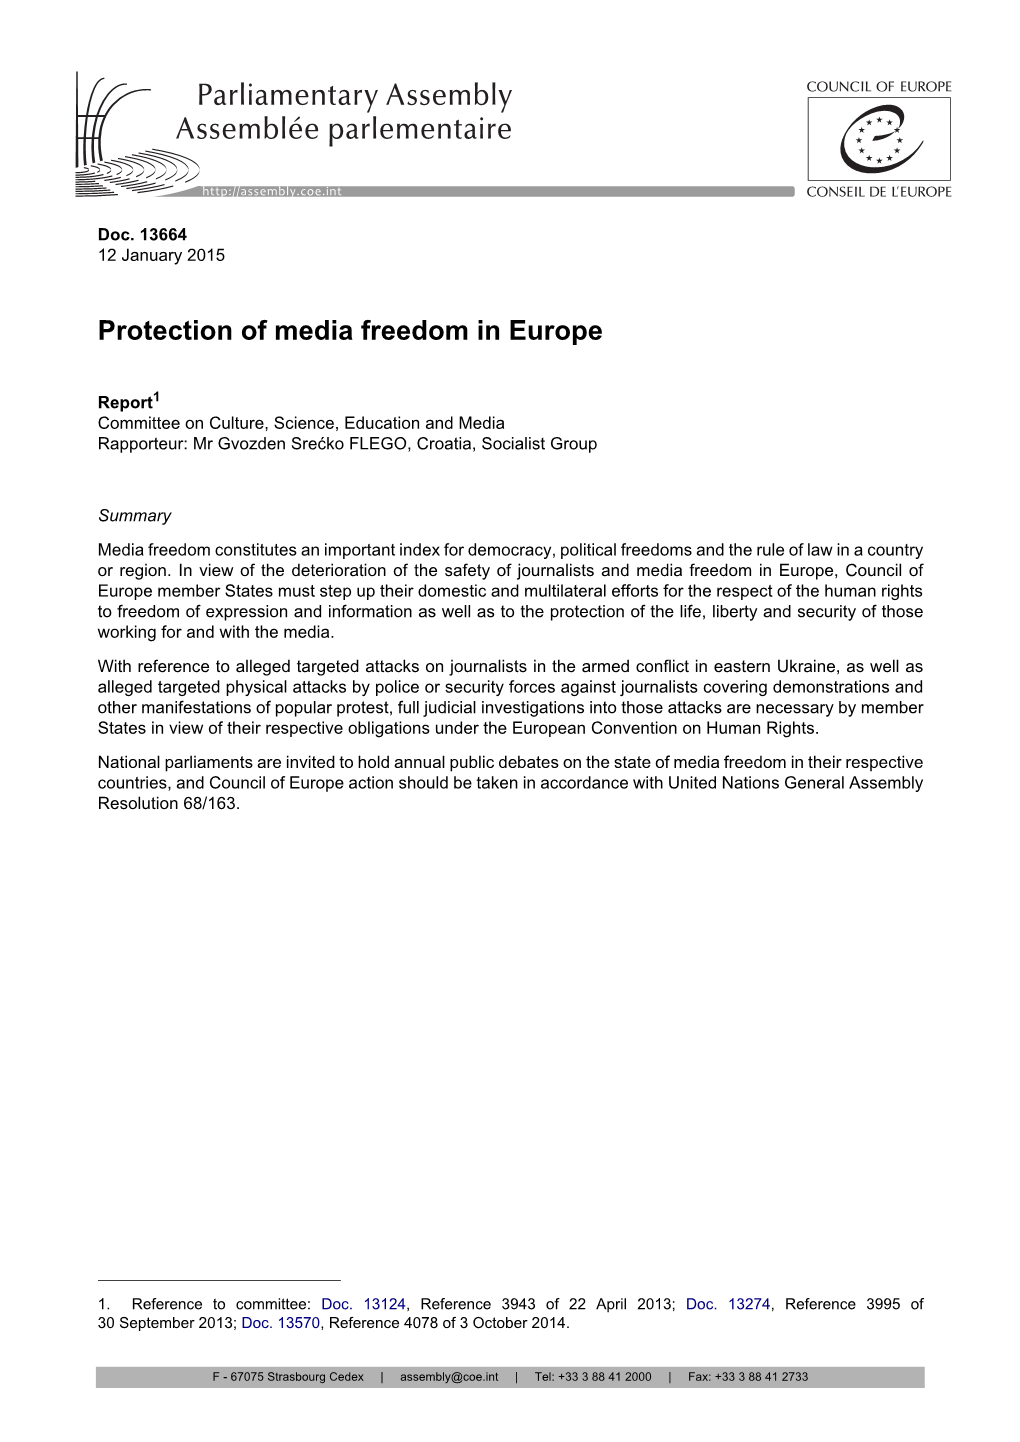 Protection of Media Freedom in Europe